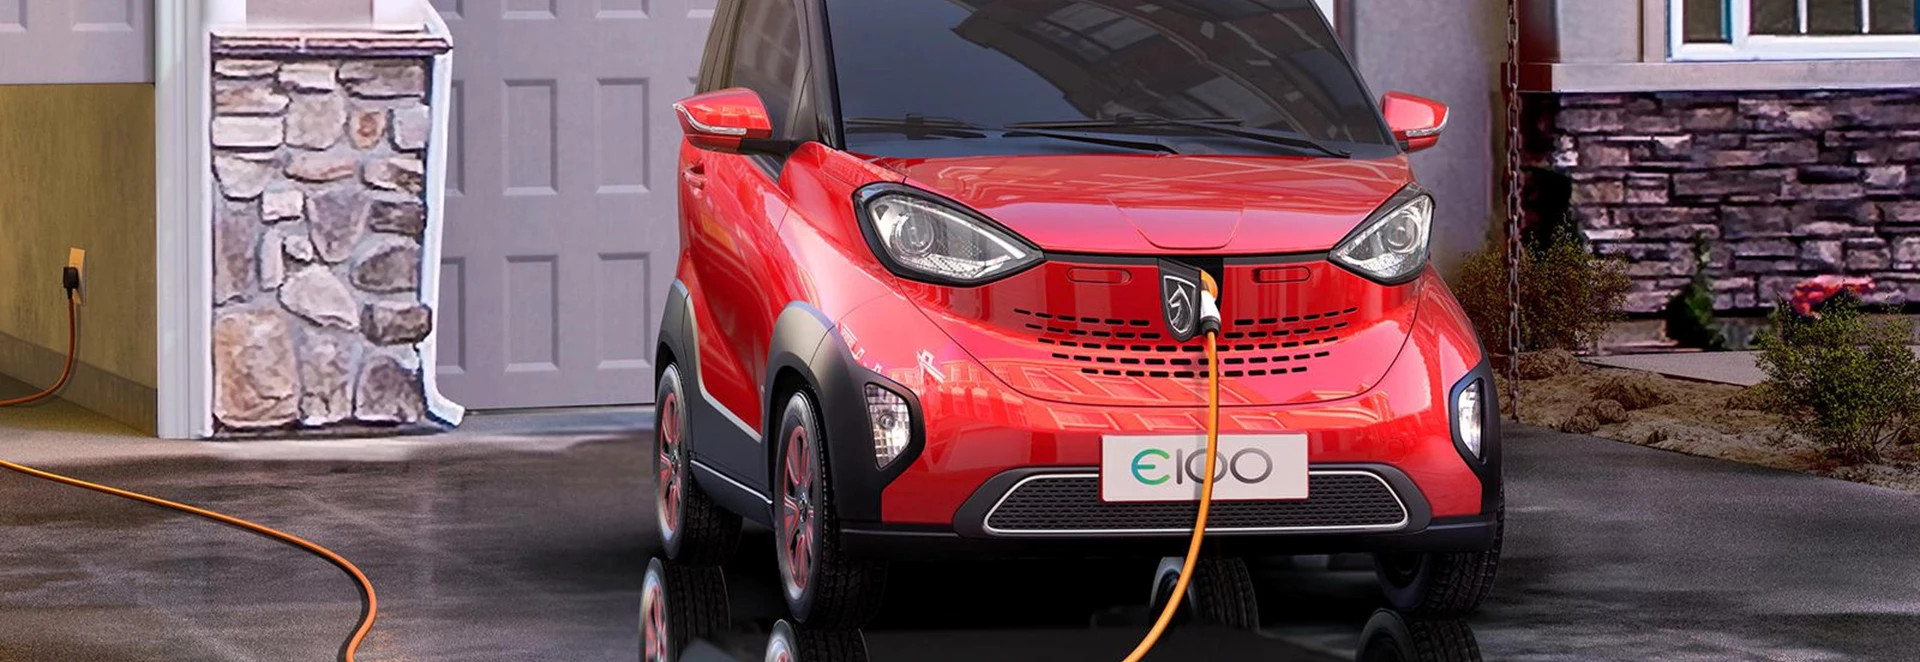 GM plans to launch Budget Friendly Electric Vehicle 